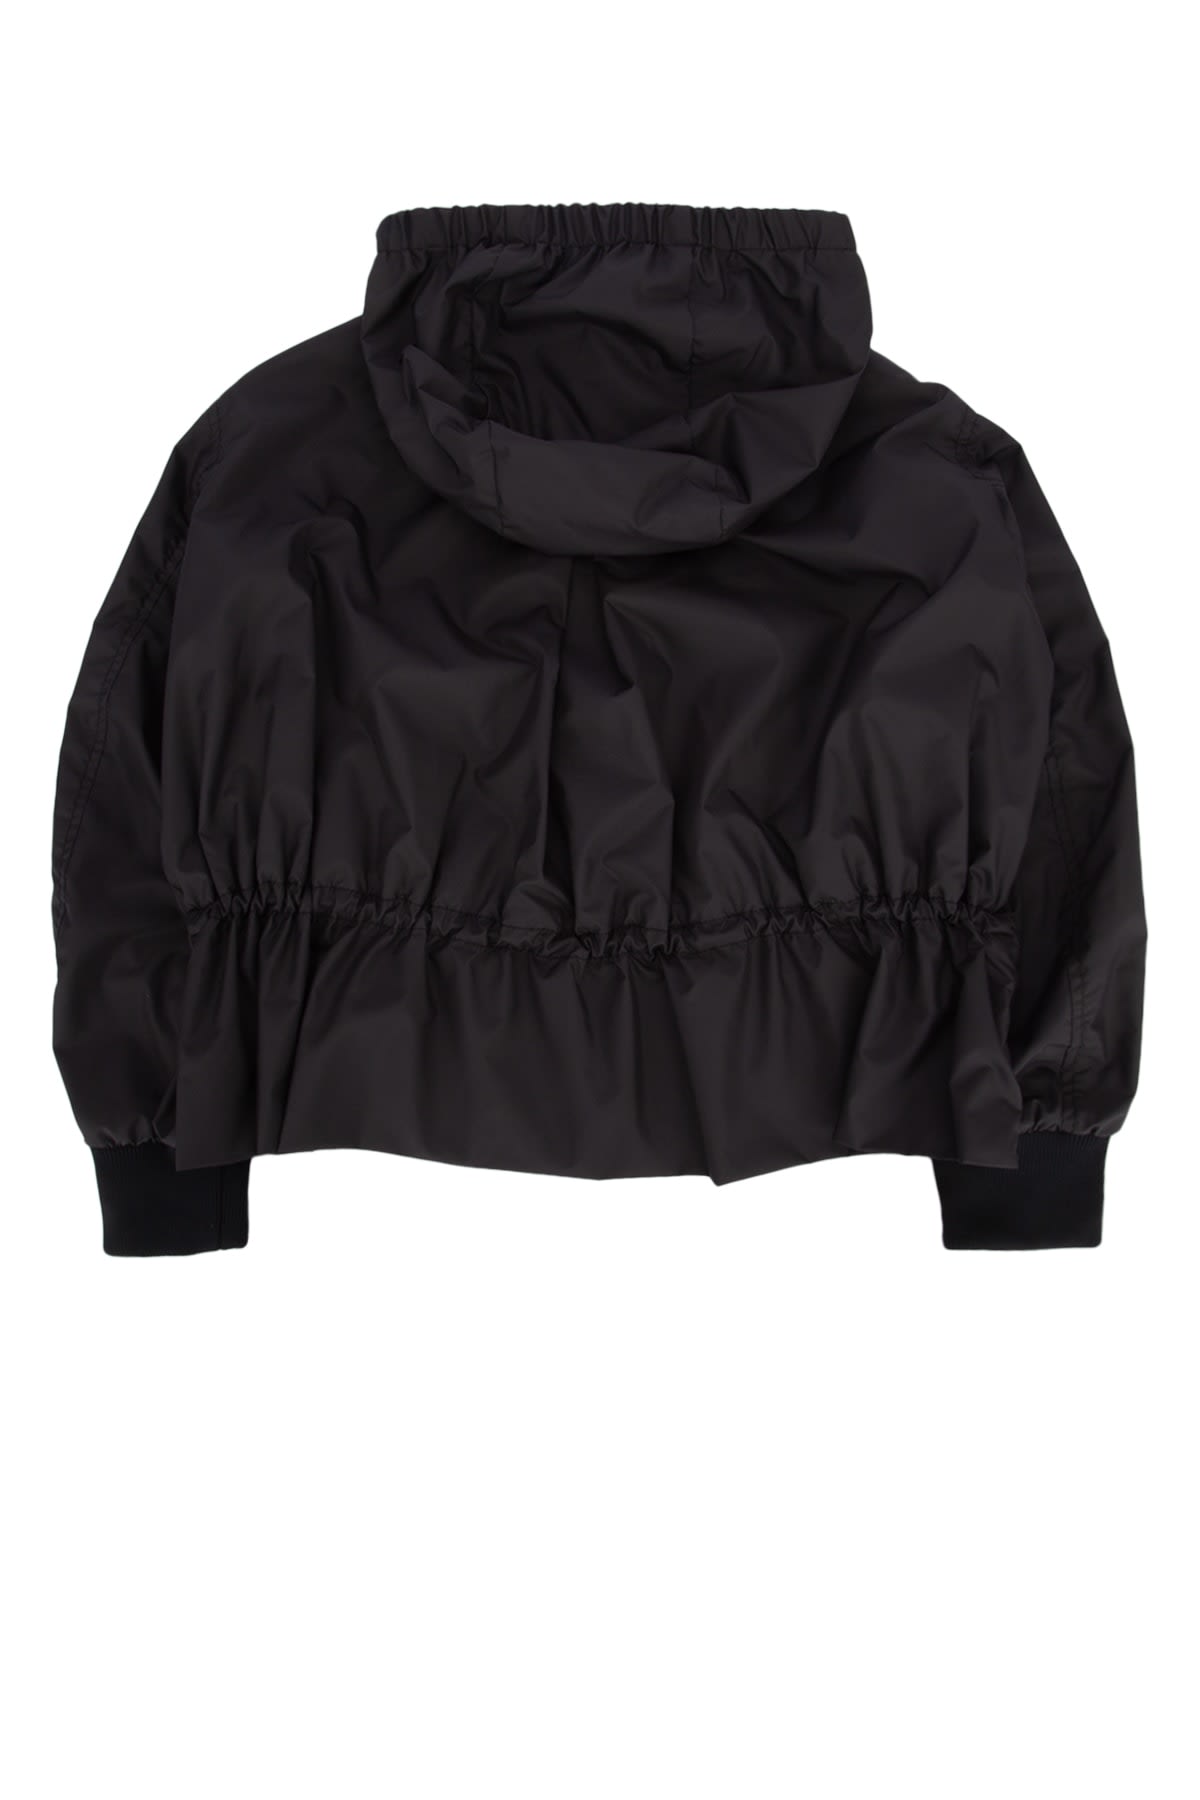 Moncler Kids' Giacca In 999